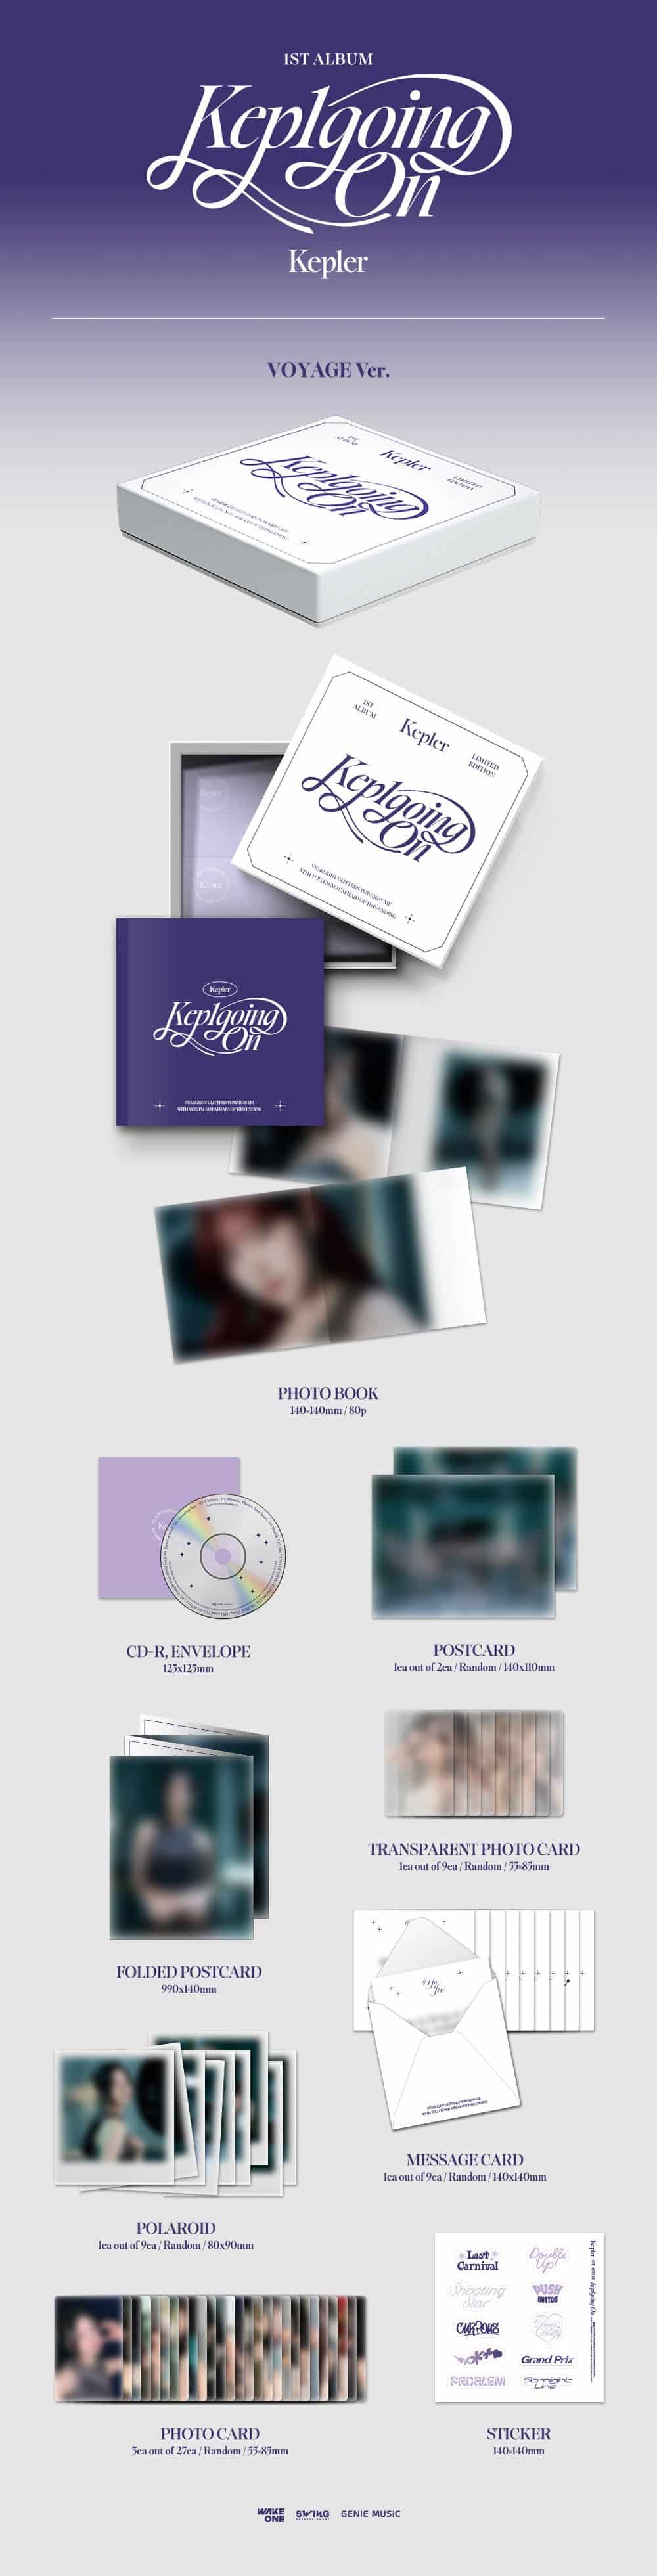 kep1er-1st-album-kep1going-on-limited-edition-voyage-ver-wholesales